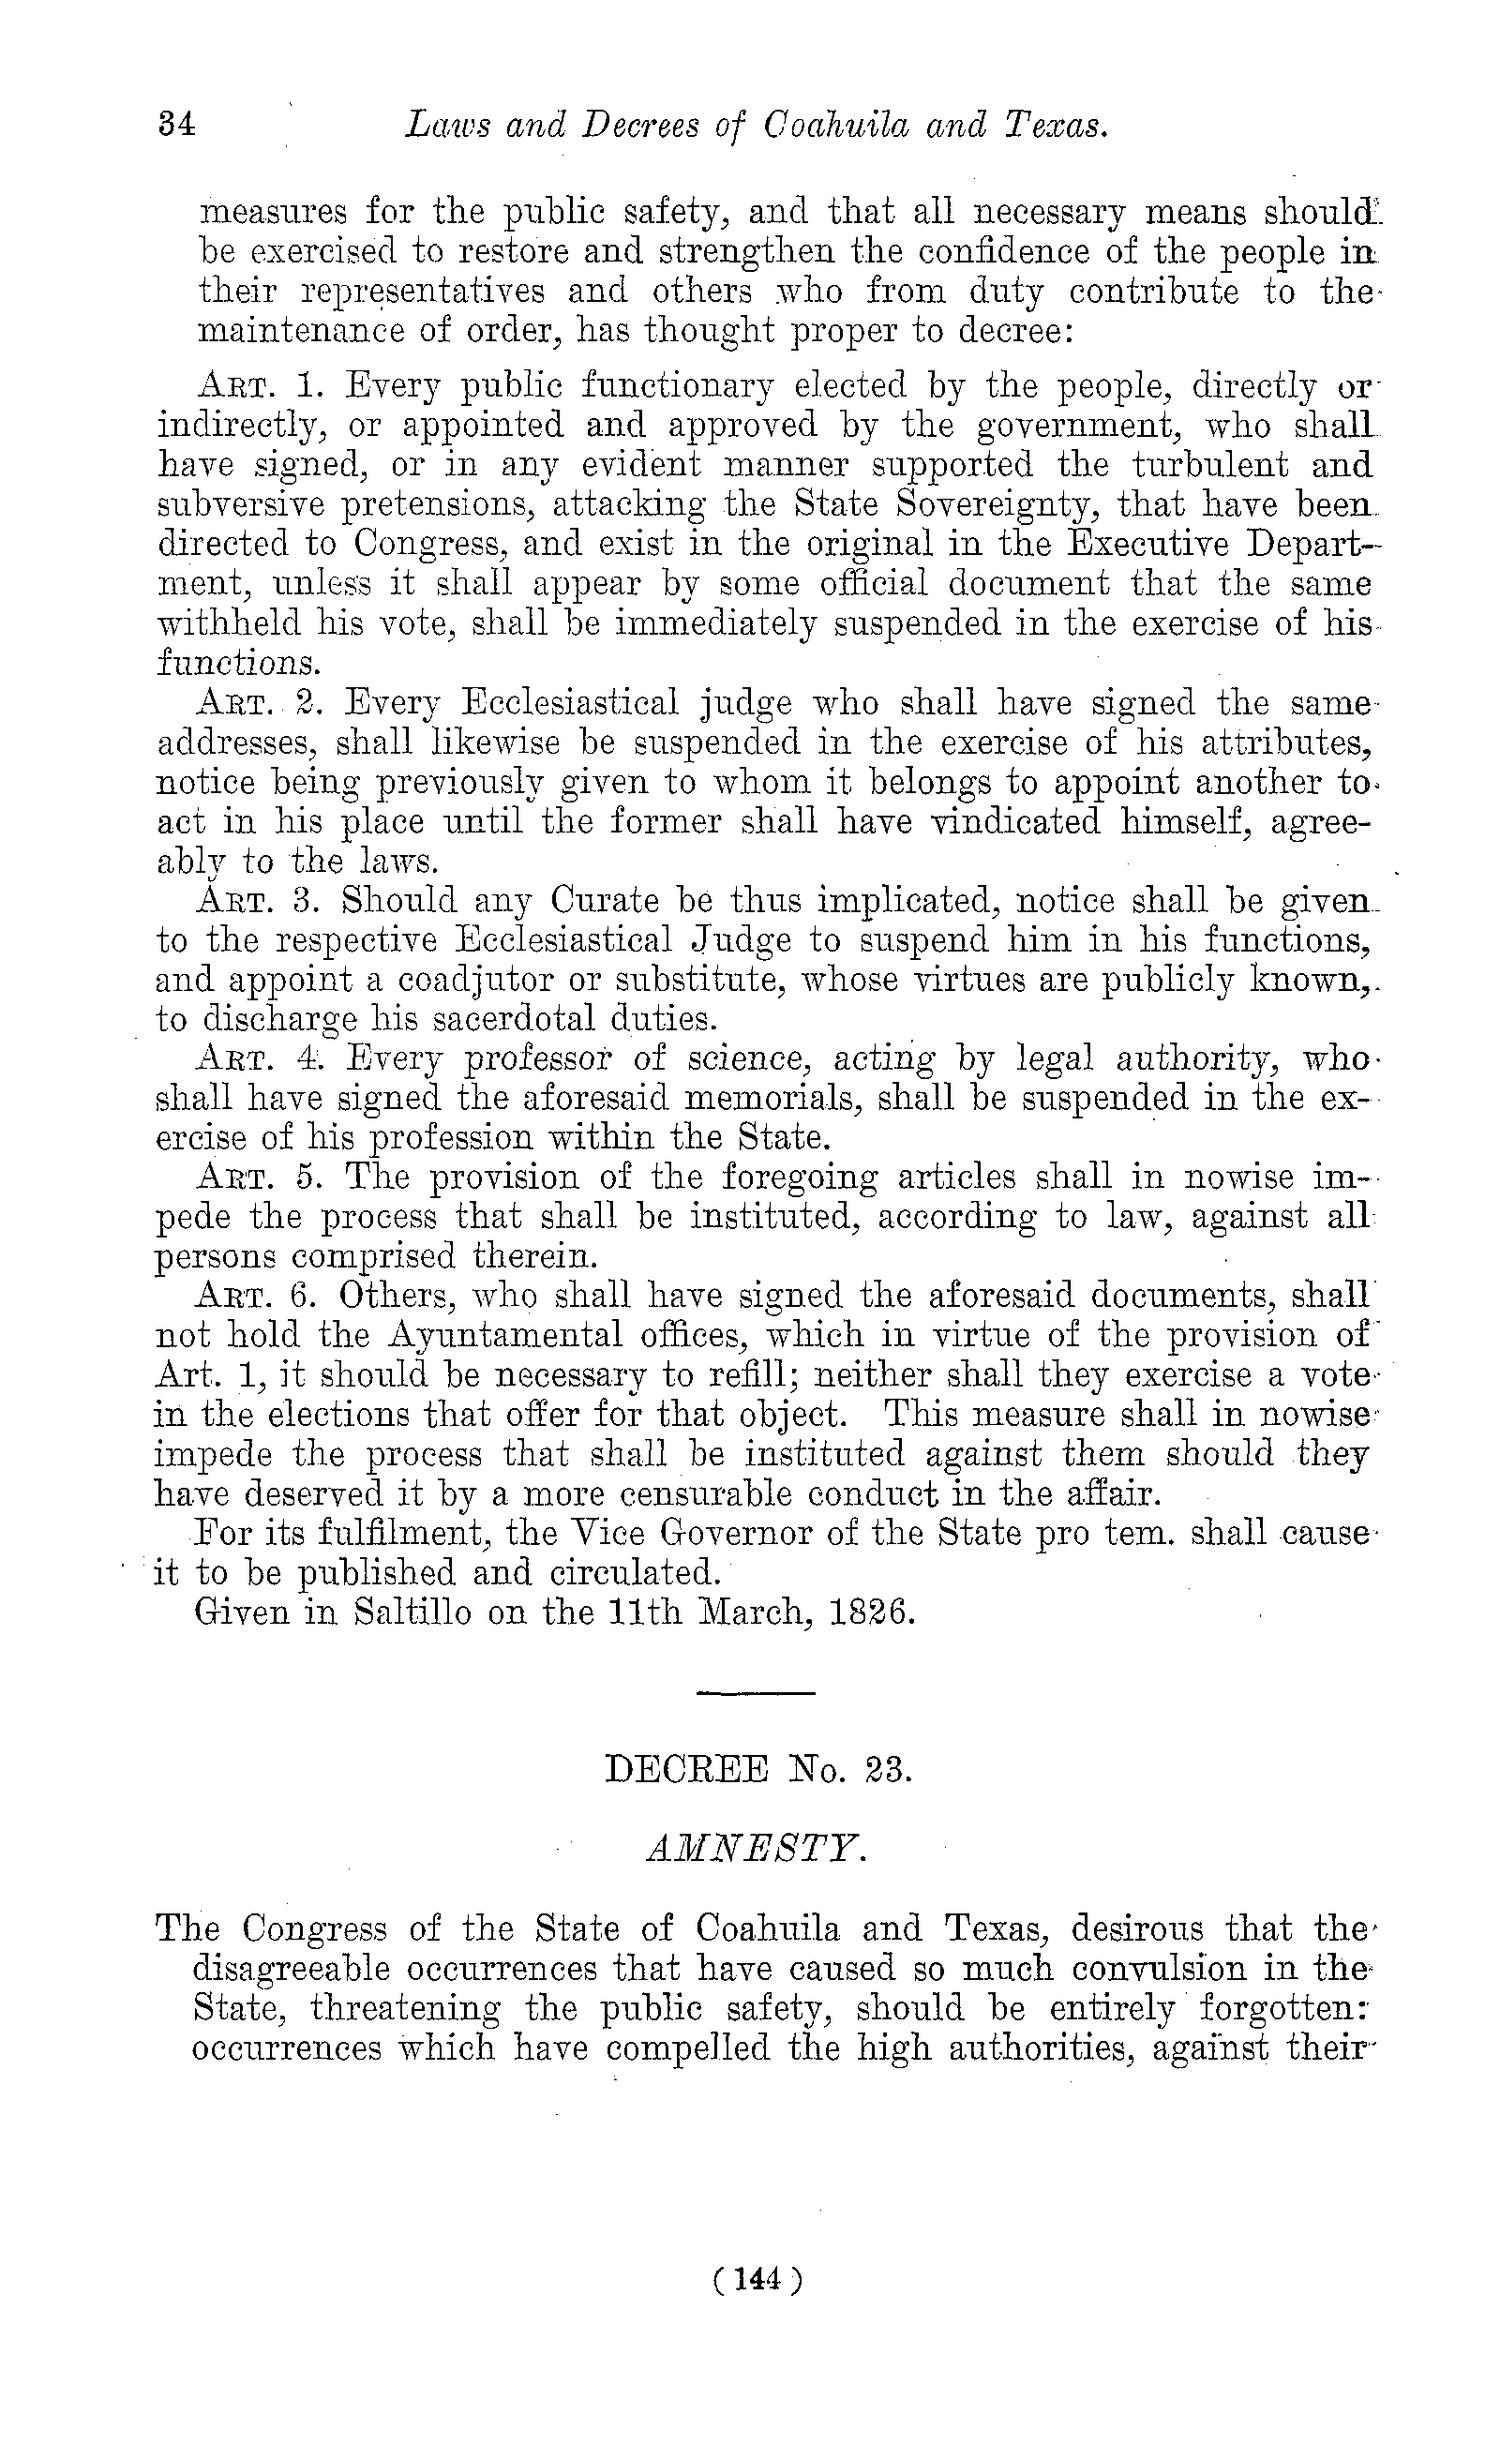 The Laws of Texas, 1822-1897 Volume 1
                                                
                                                    144
                                                